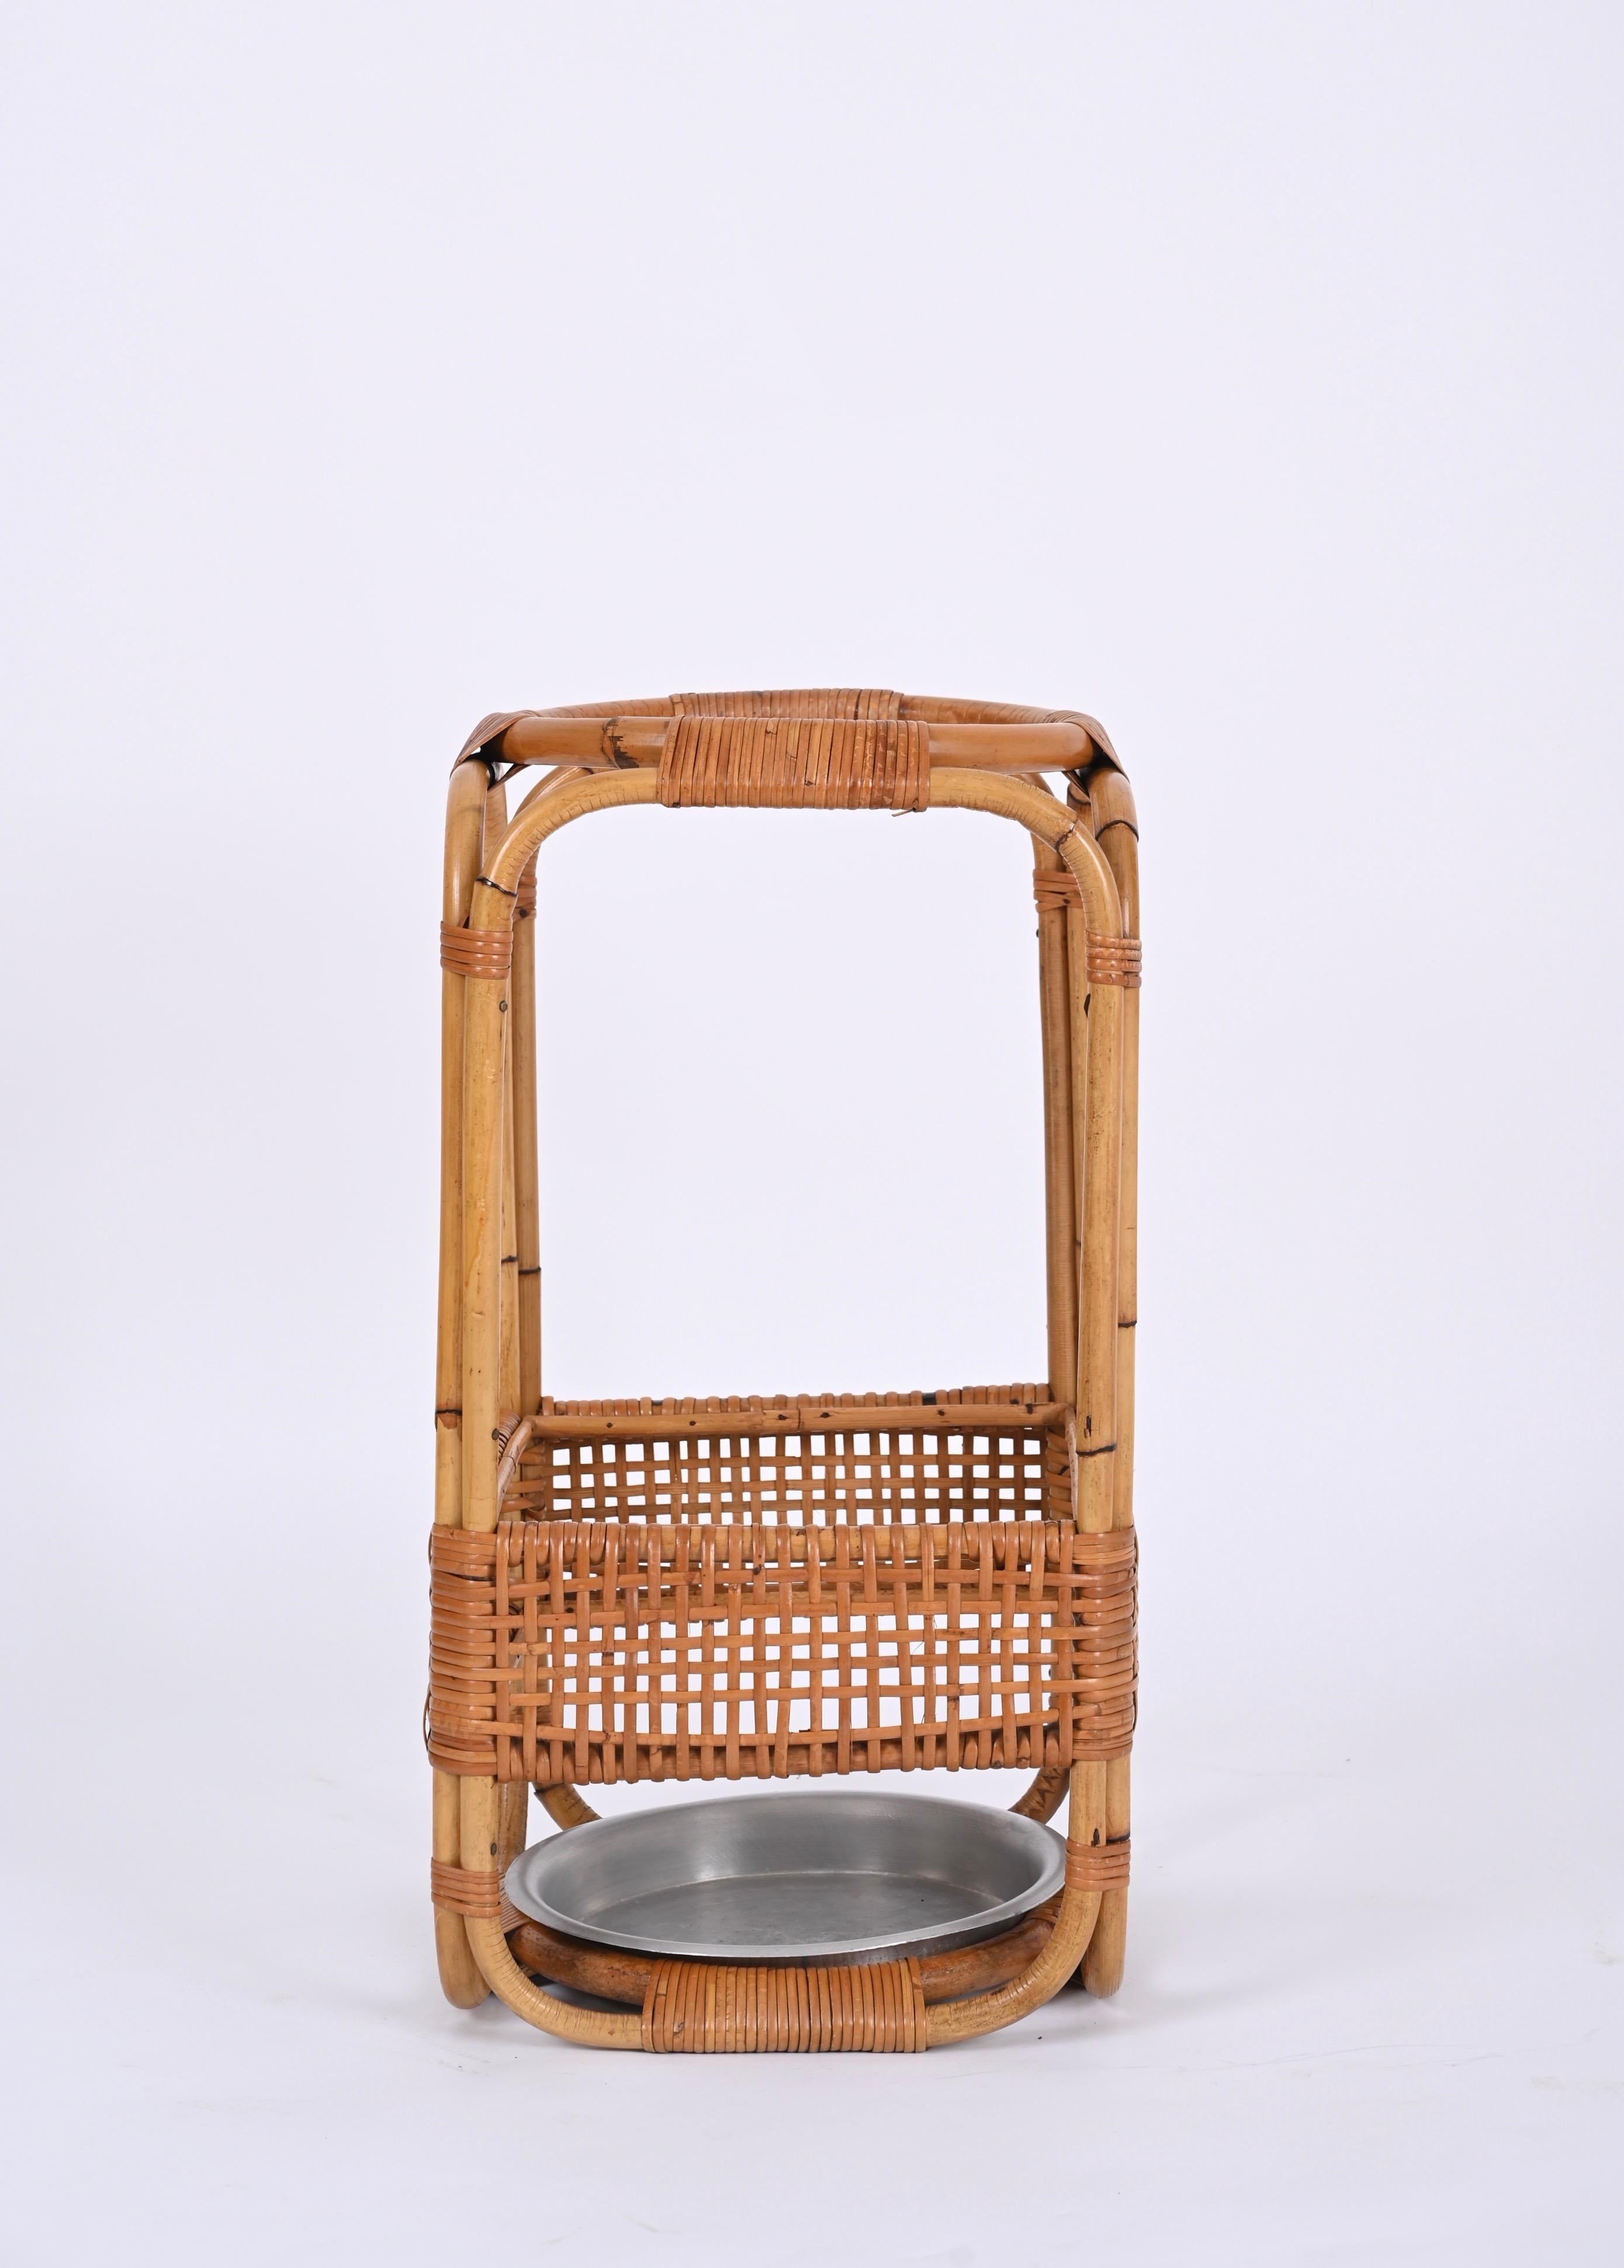 Bamboo and Wicker Umbrella Stand in the Style of Franco Albini, Italy, 1960s For Sale 6